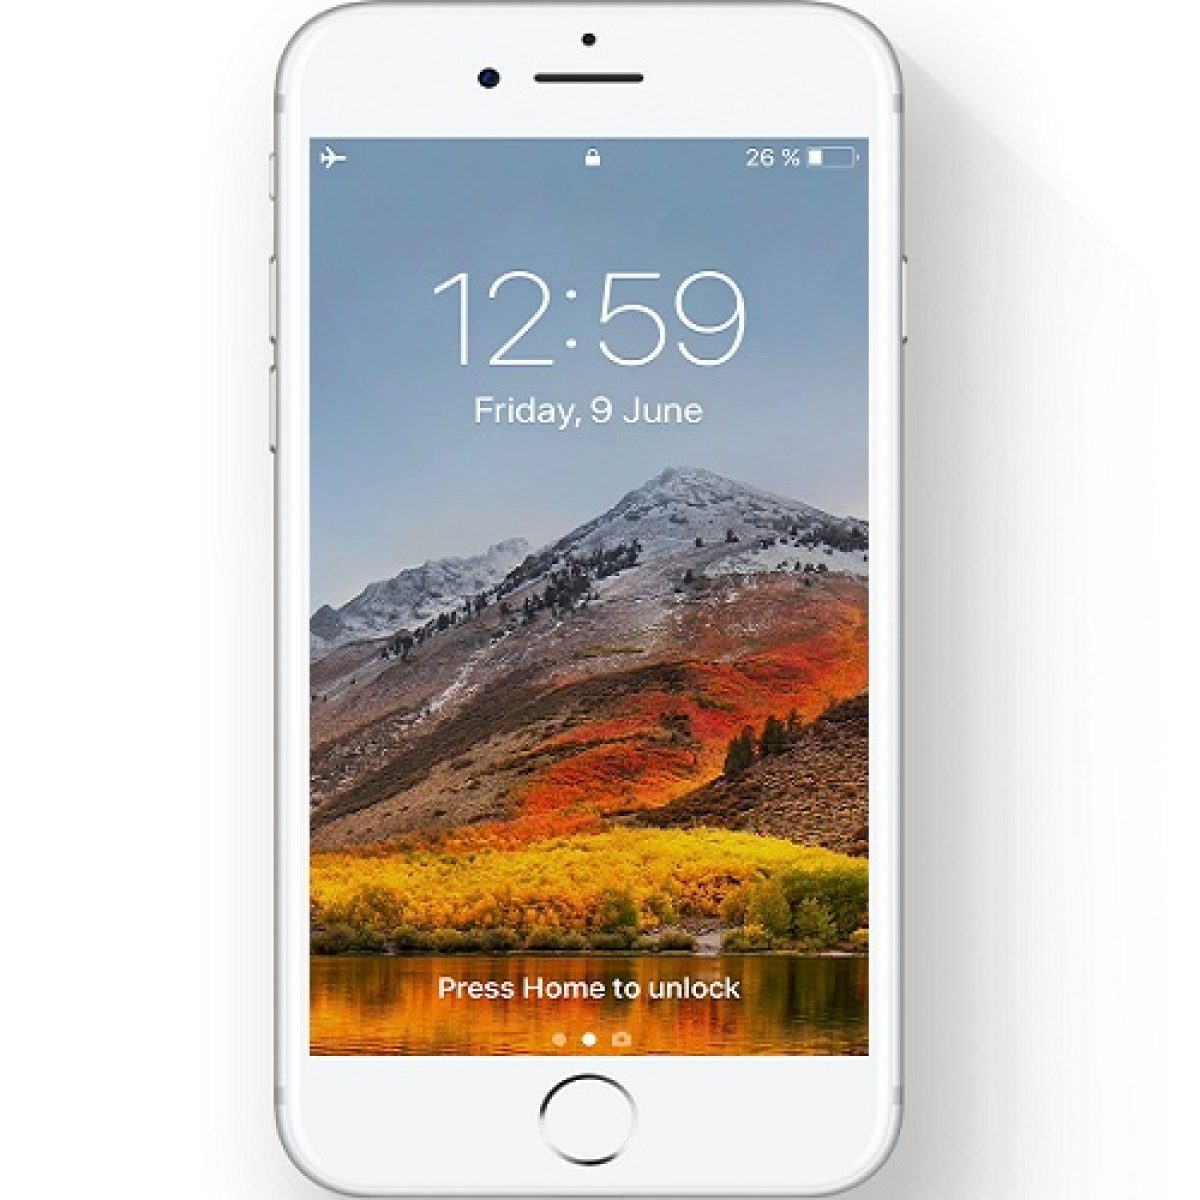 Download The Macos High Sierra Wallpaper For Iphone Ipad And Mac